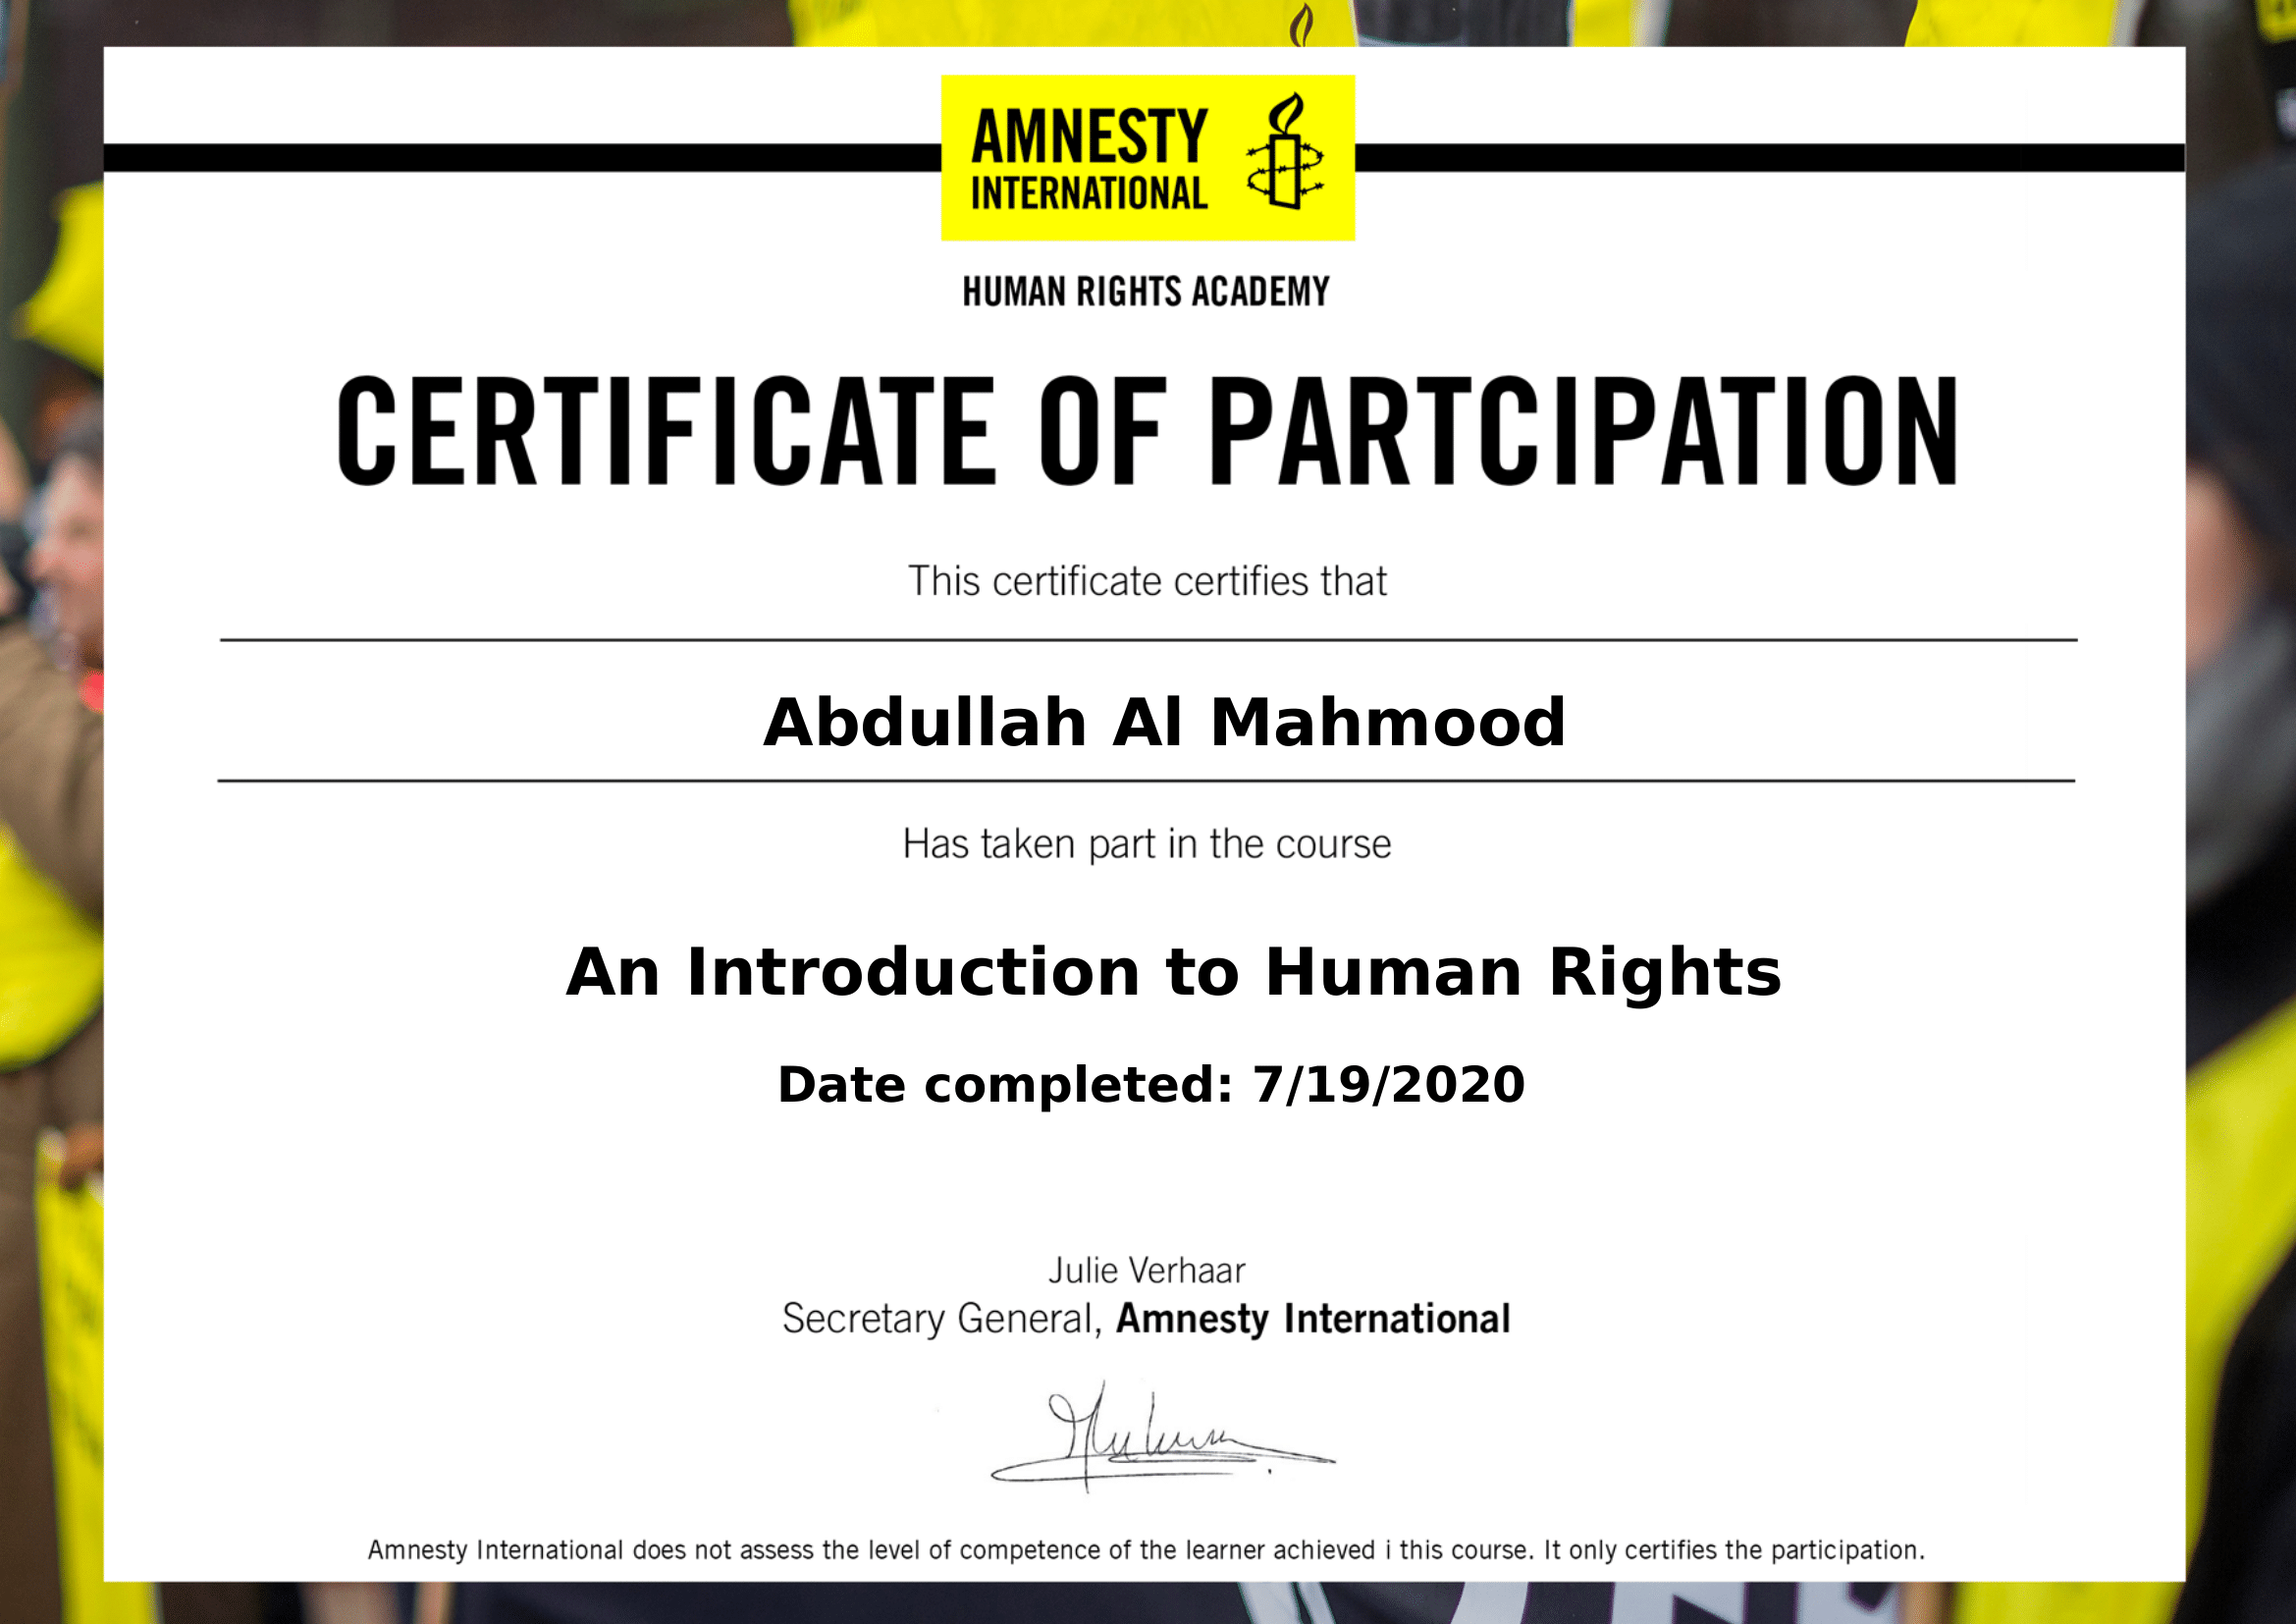 AMNESTY INTERNATIONAL- AN INTRODUCTION TO HUMAN RIGHTS 115 53 147564 1595099058 Certificate of Participation-1.png